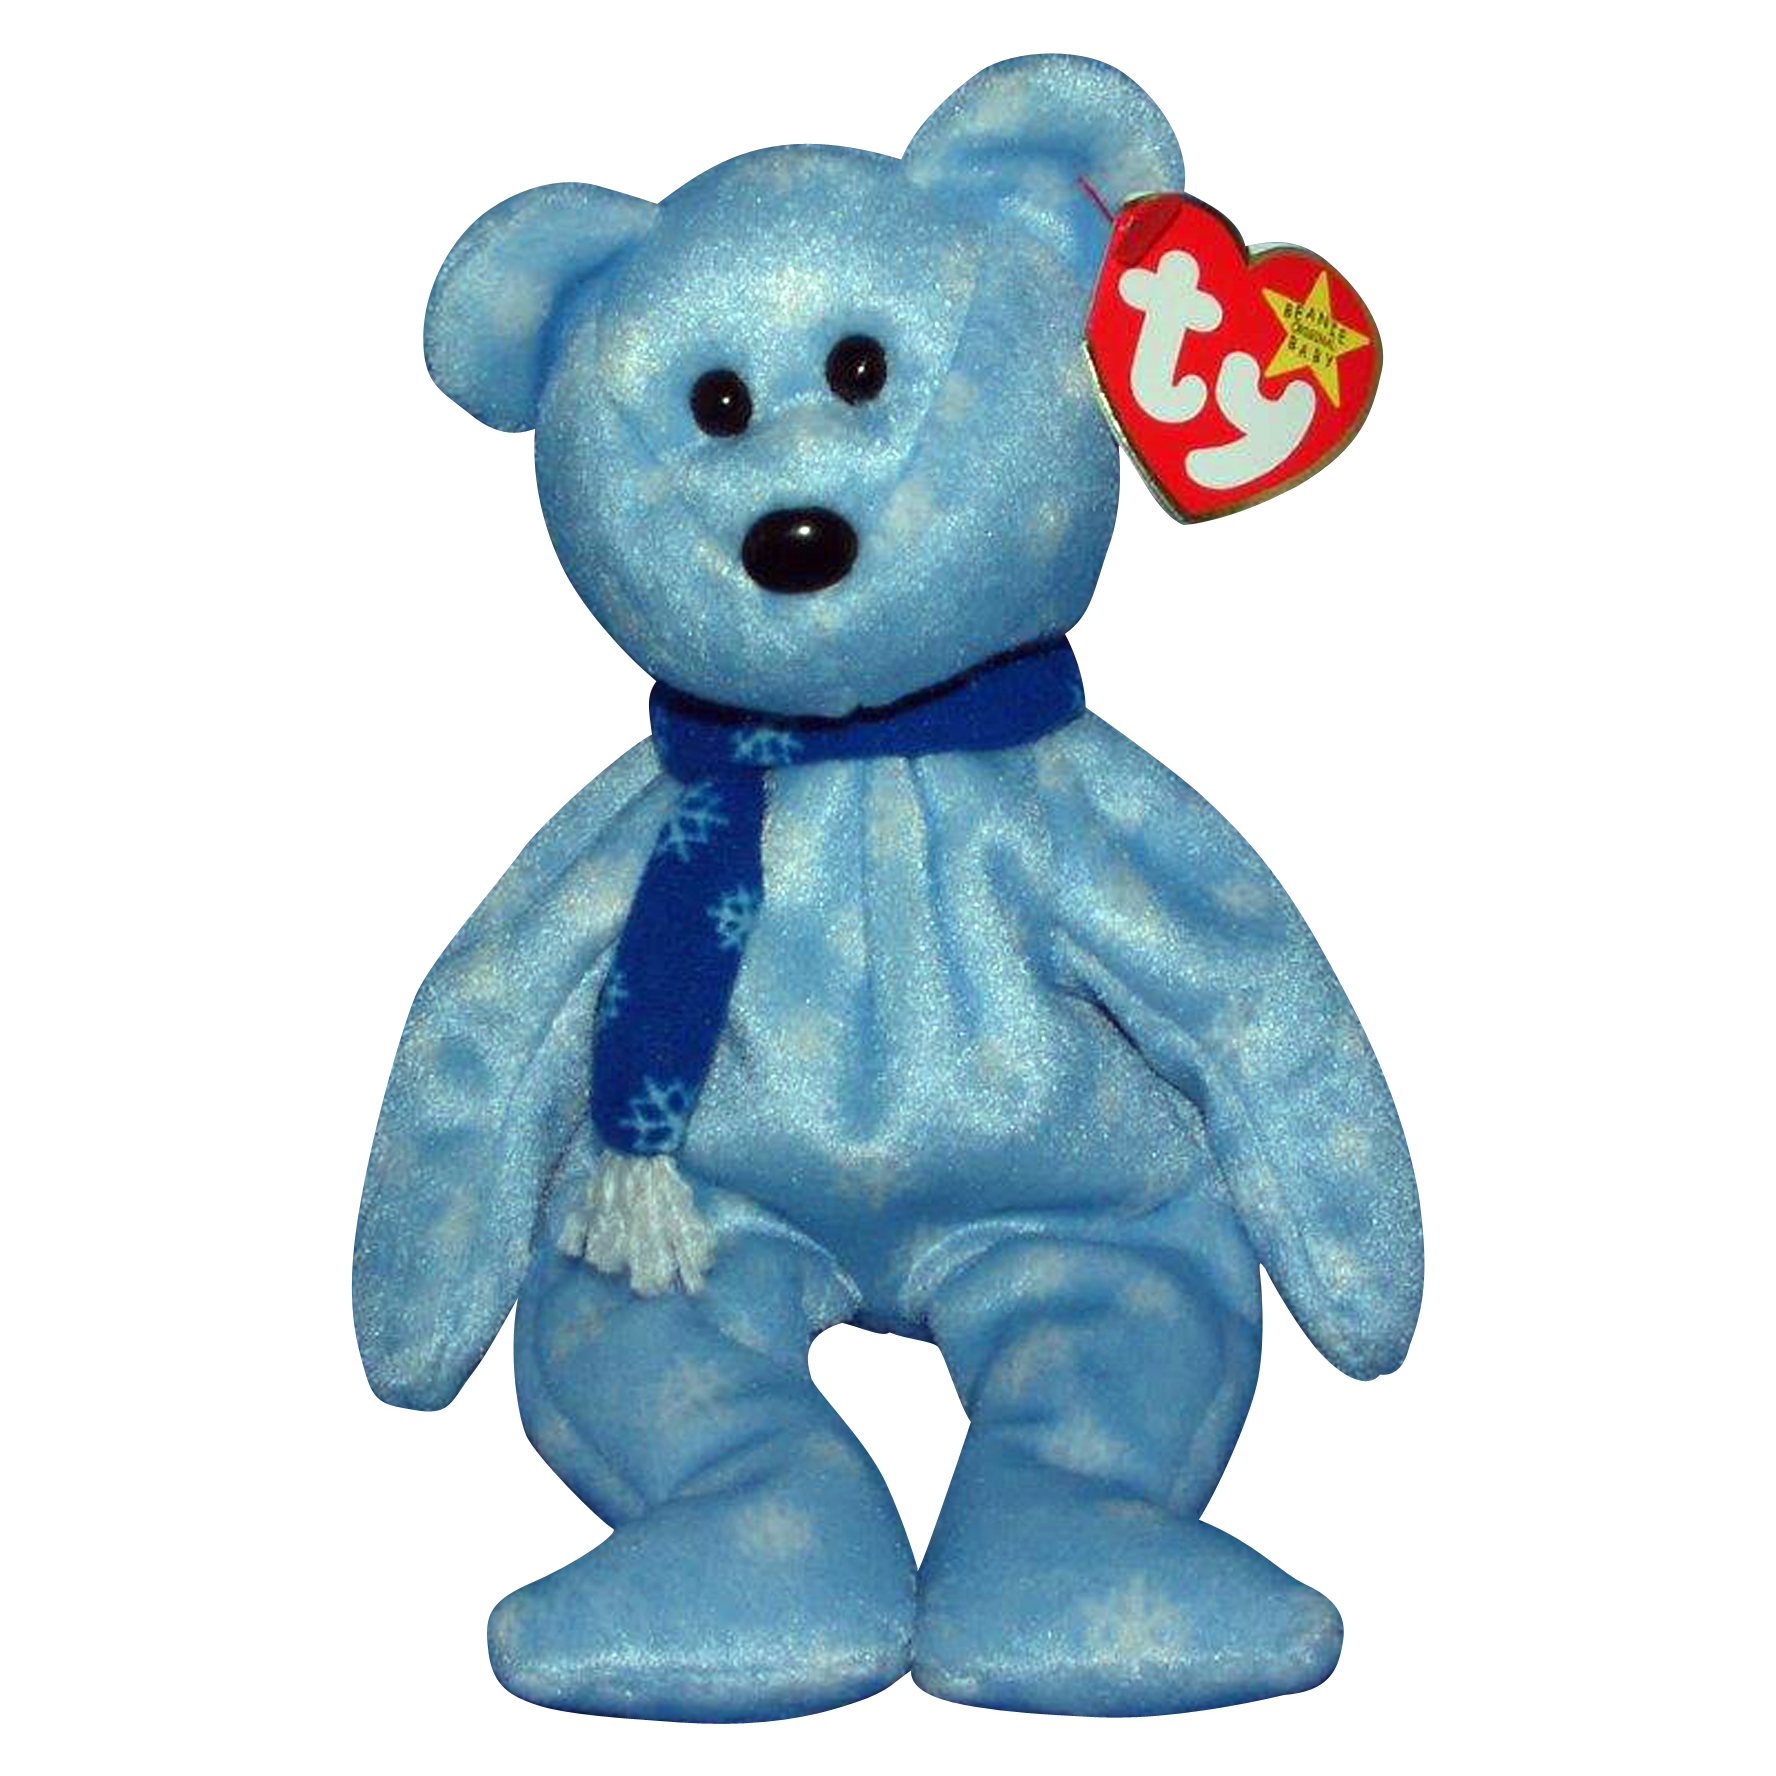 Ty Beanie Babies 1999 Holiday Teddy Bear Plush Toy Blue for sale online